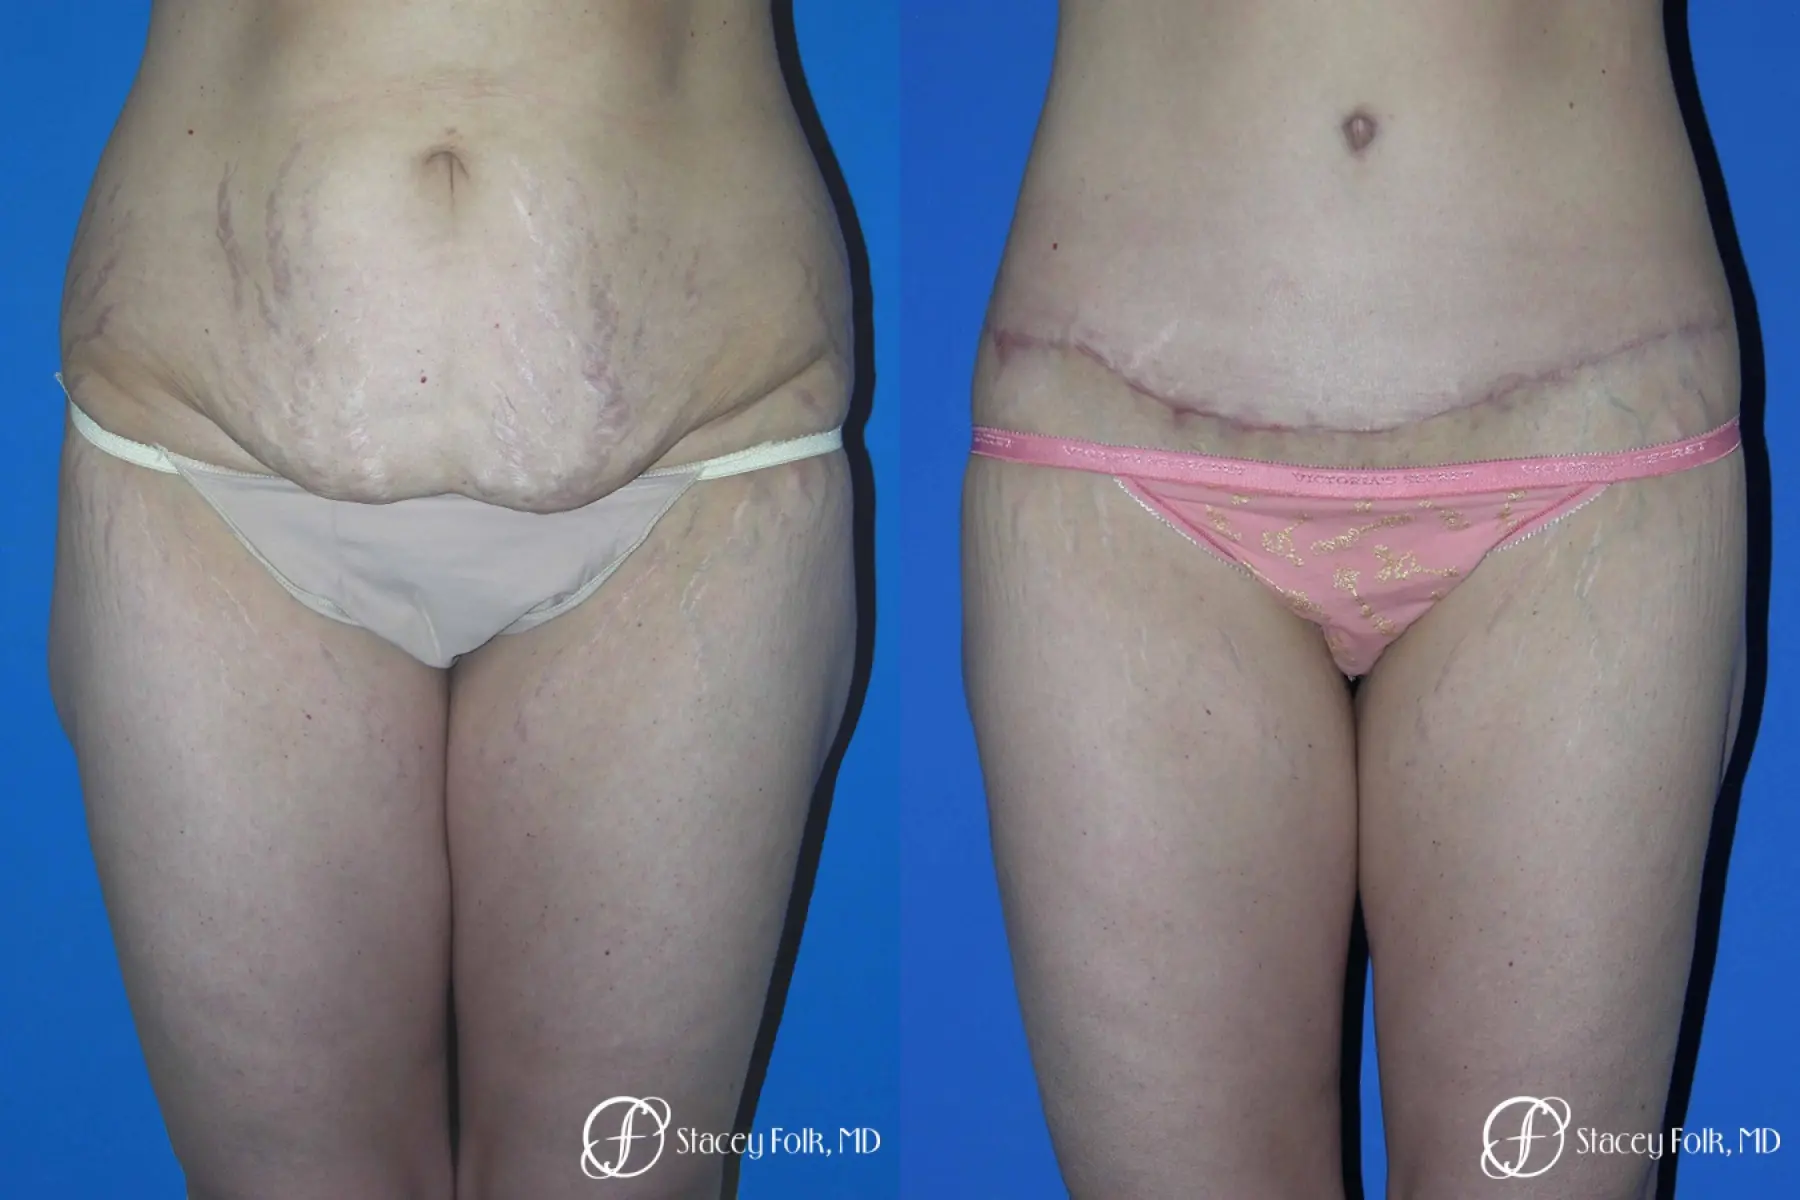 Body Lift Before and After Pictures Case 11523, Denver, CO